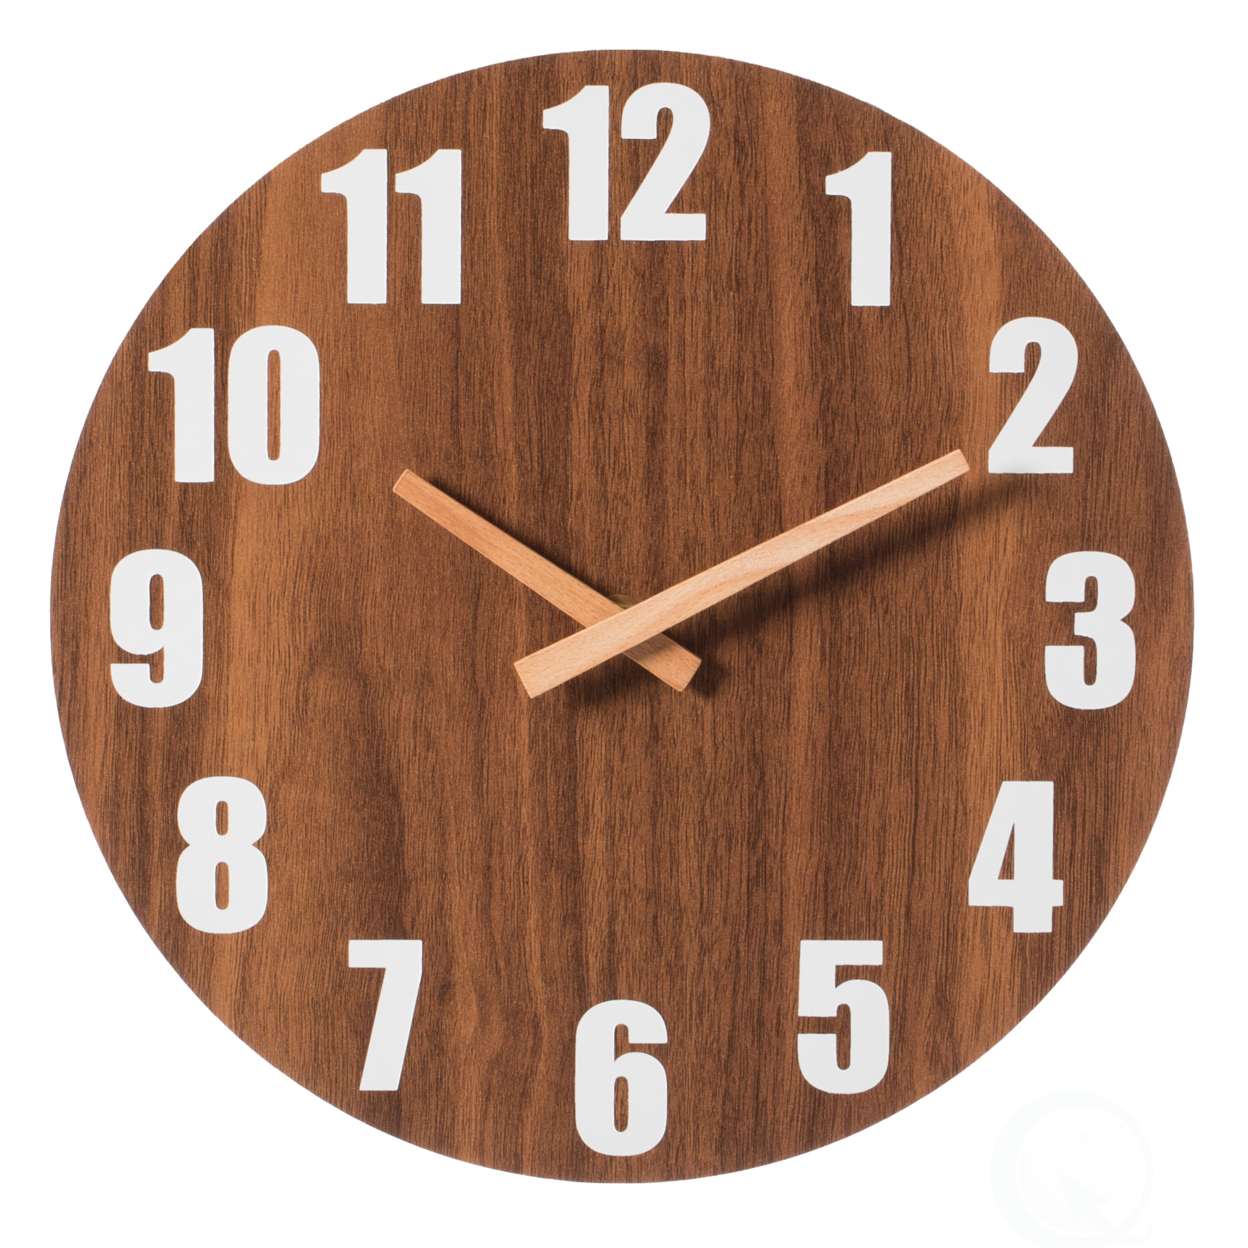 Antique Home Decor Wall Clock For Living Room, Bedroom, Kitchen, Or Dining Room, Brown Natural Wood